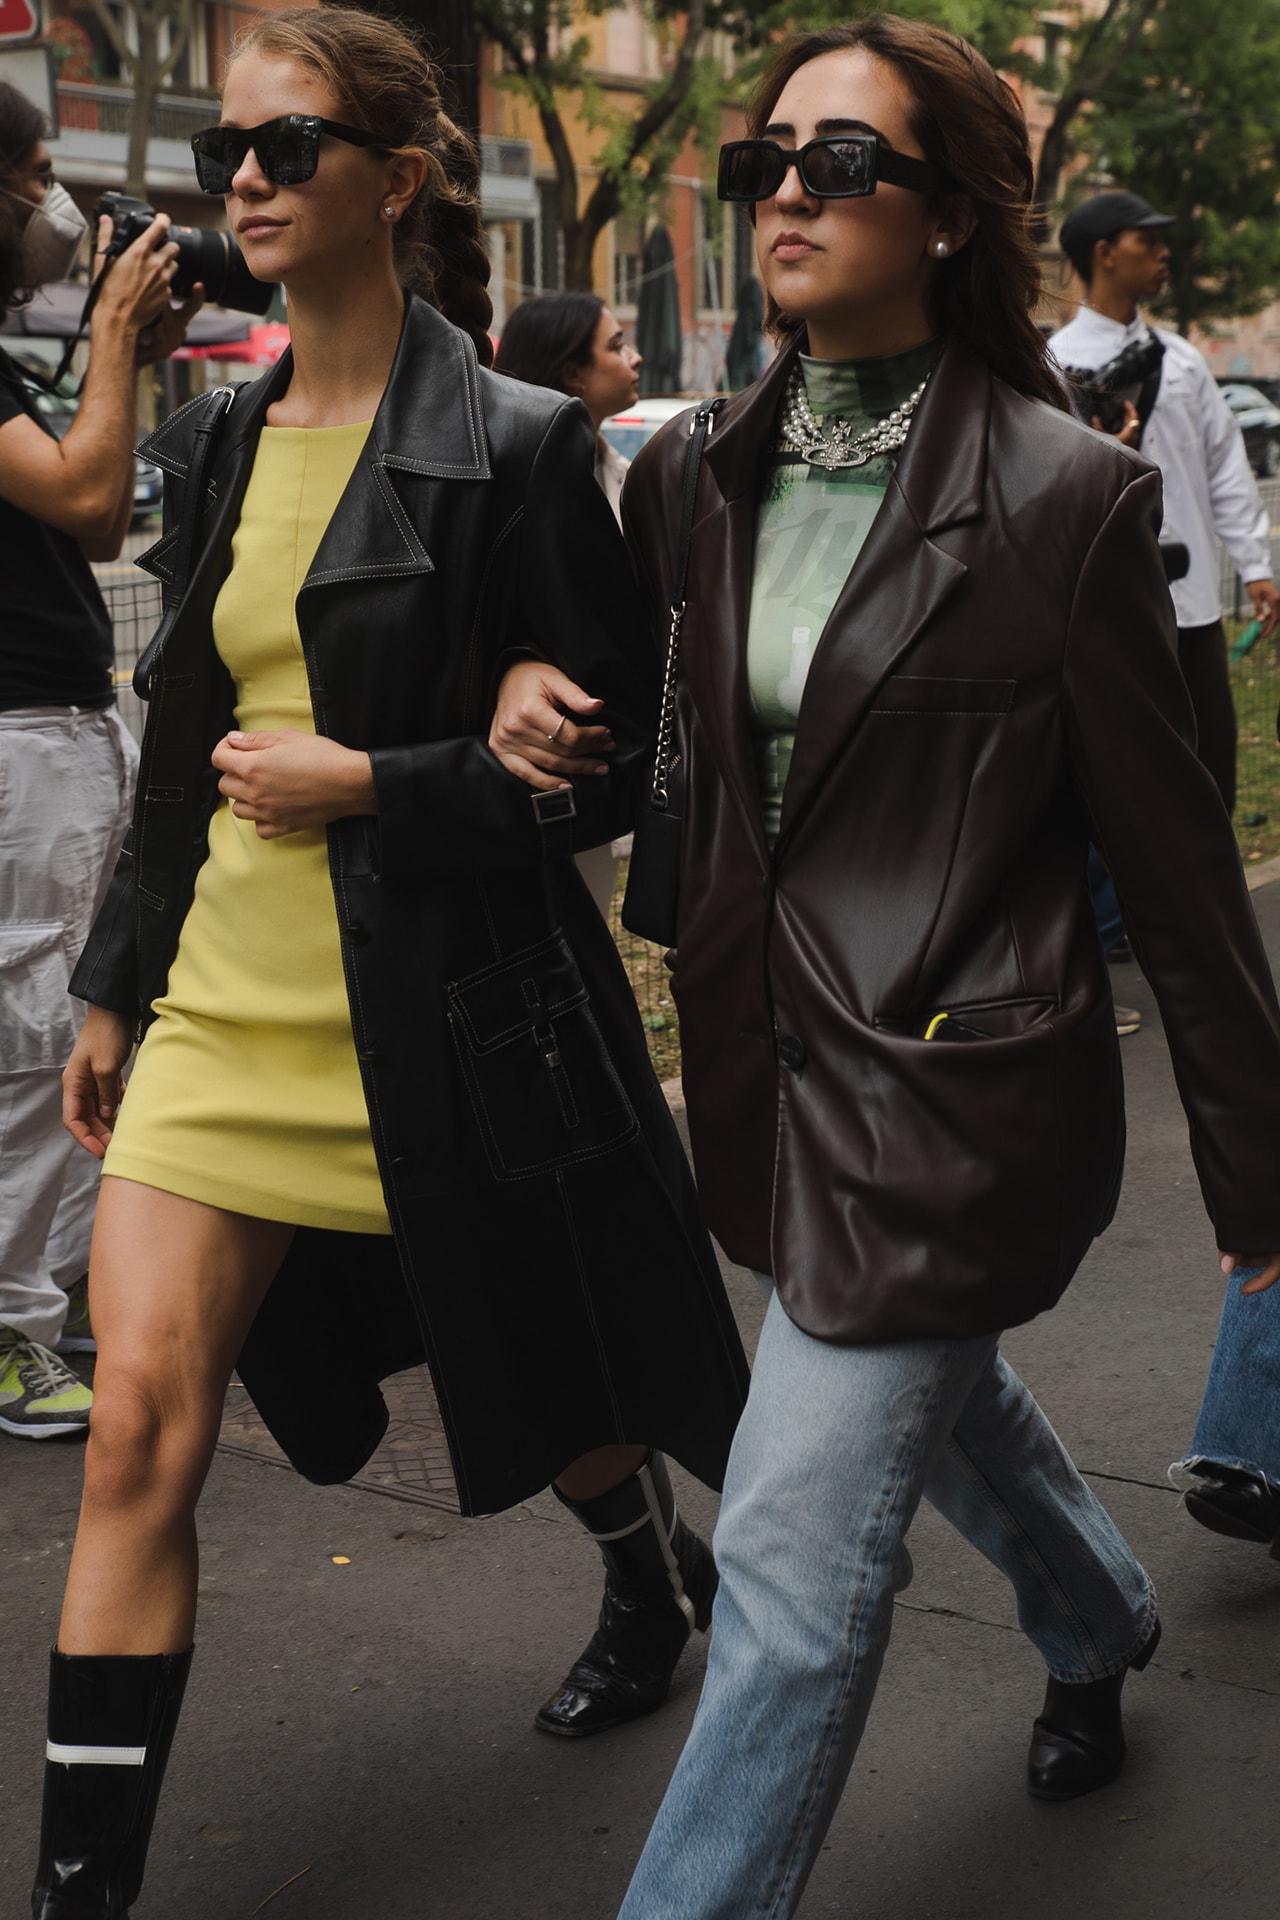 Milan Fashion Week Street Style Spring Summer 2022 SS22 Influencers Outfit Blazer Coat Black Leather Vivienne Westwood pearl necklace choker